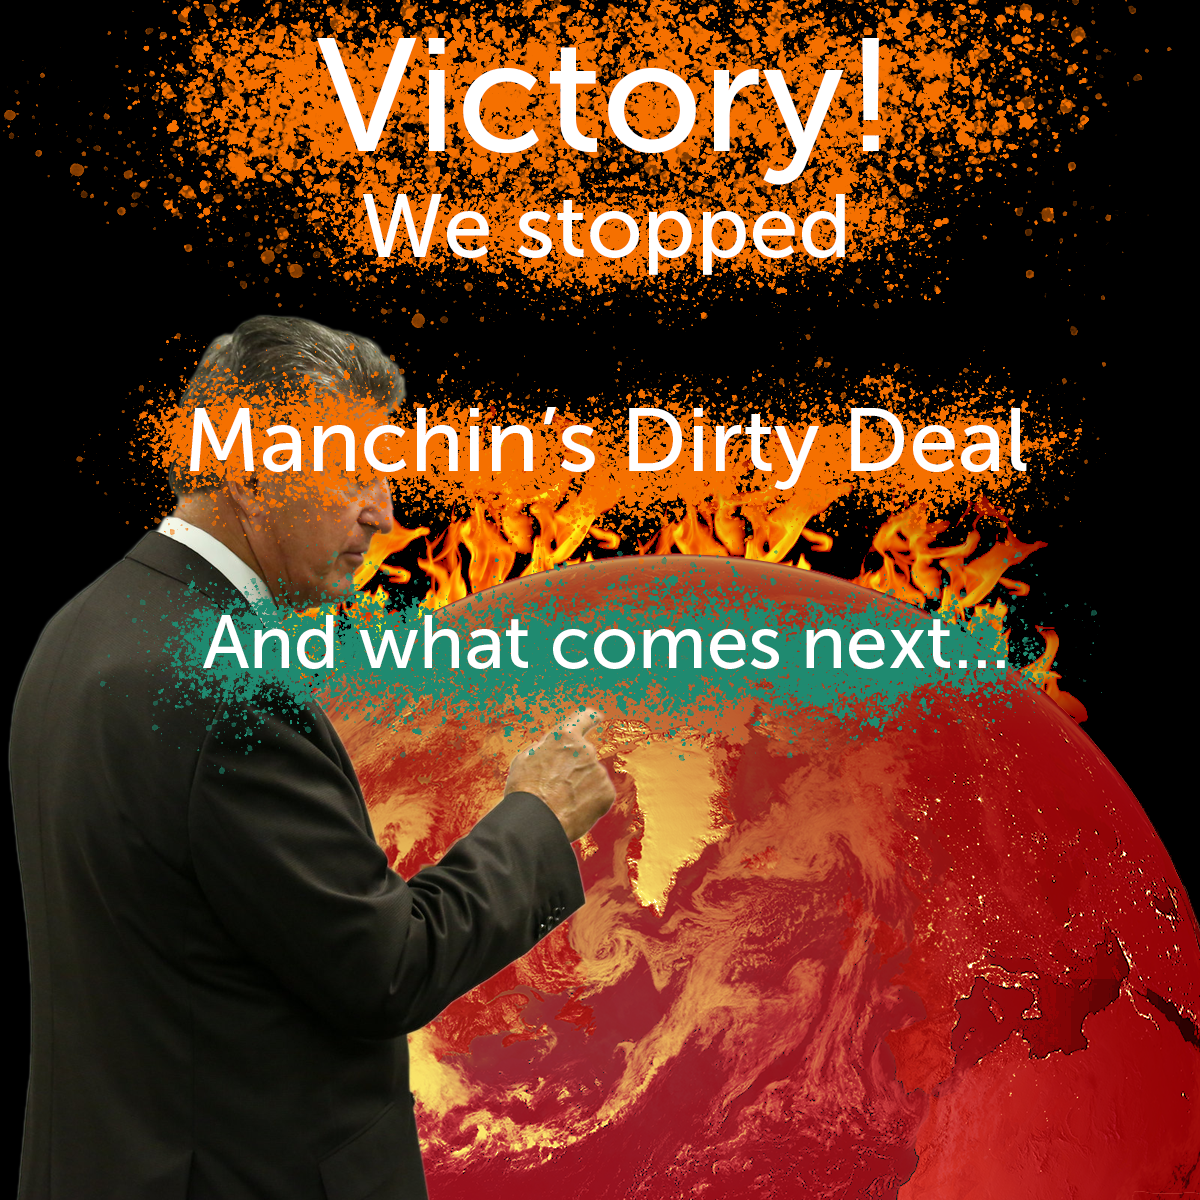 Victory! we stopped Manchin's dirty deal and what comes next